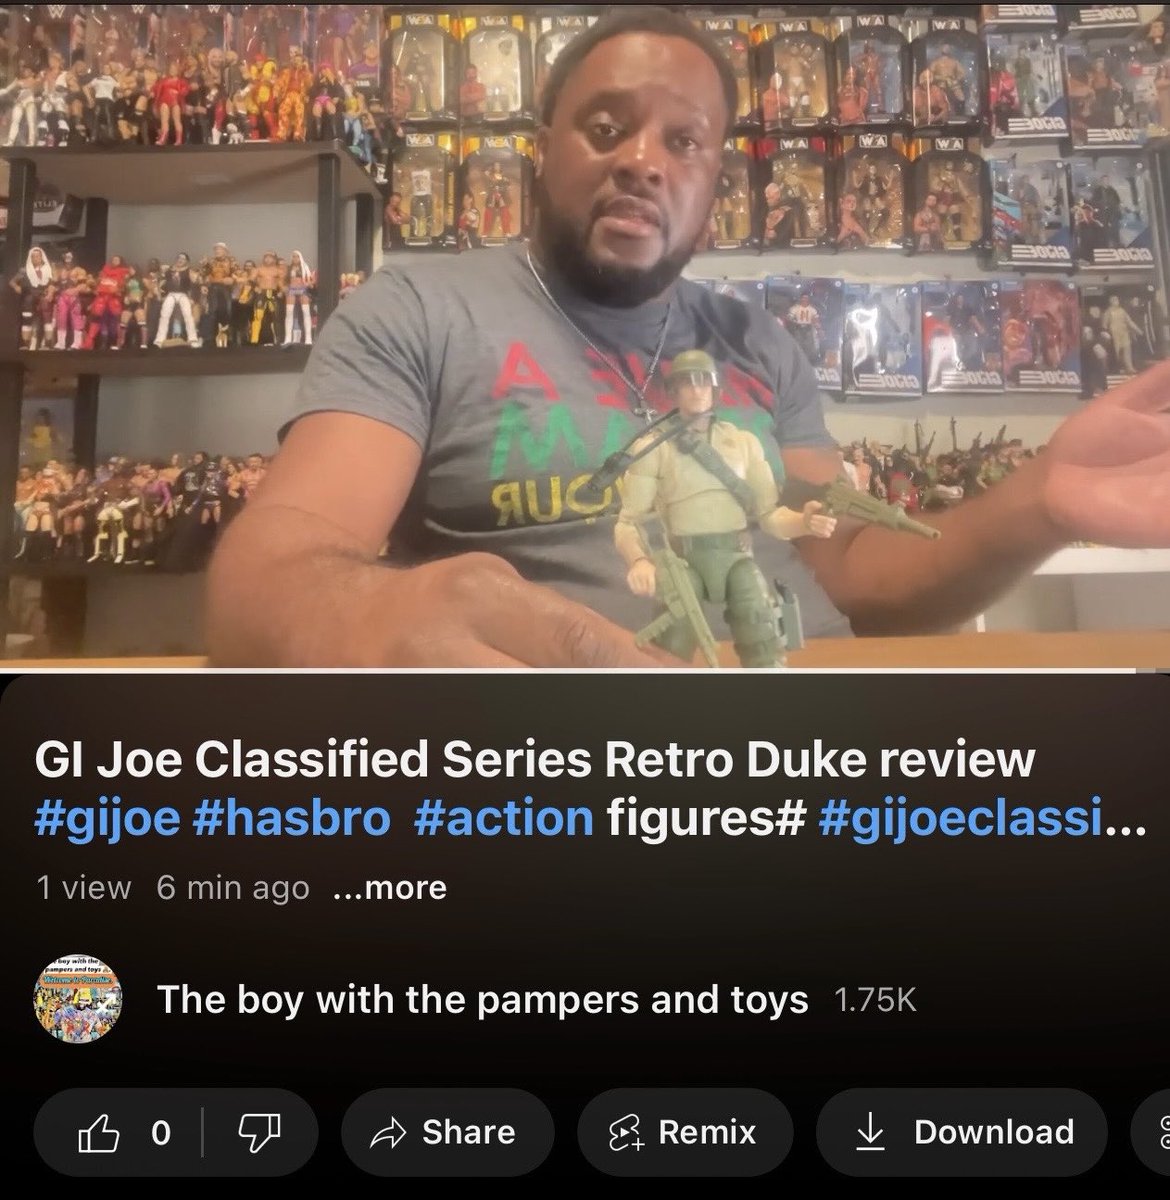 Please like, share & subscribe today 🌎. #gijoe #unboxing #review #duke #hasbro #actionfigures #toys #youtuber #like #share #subscribe #toychannel #theboywiththepampersandtoys #youtuber